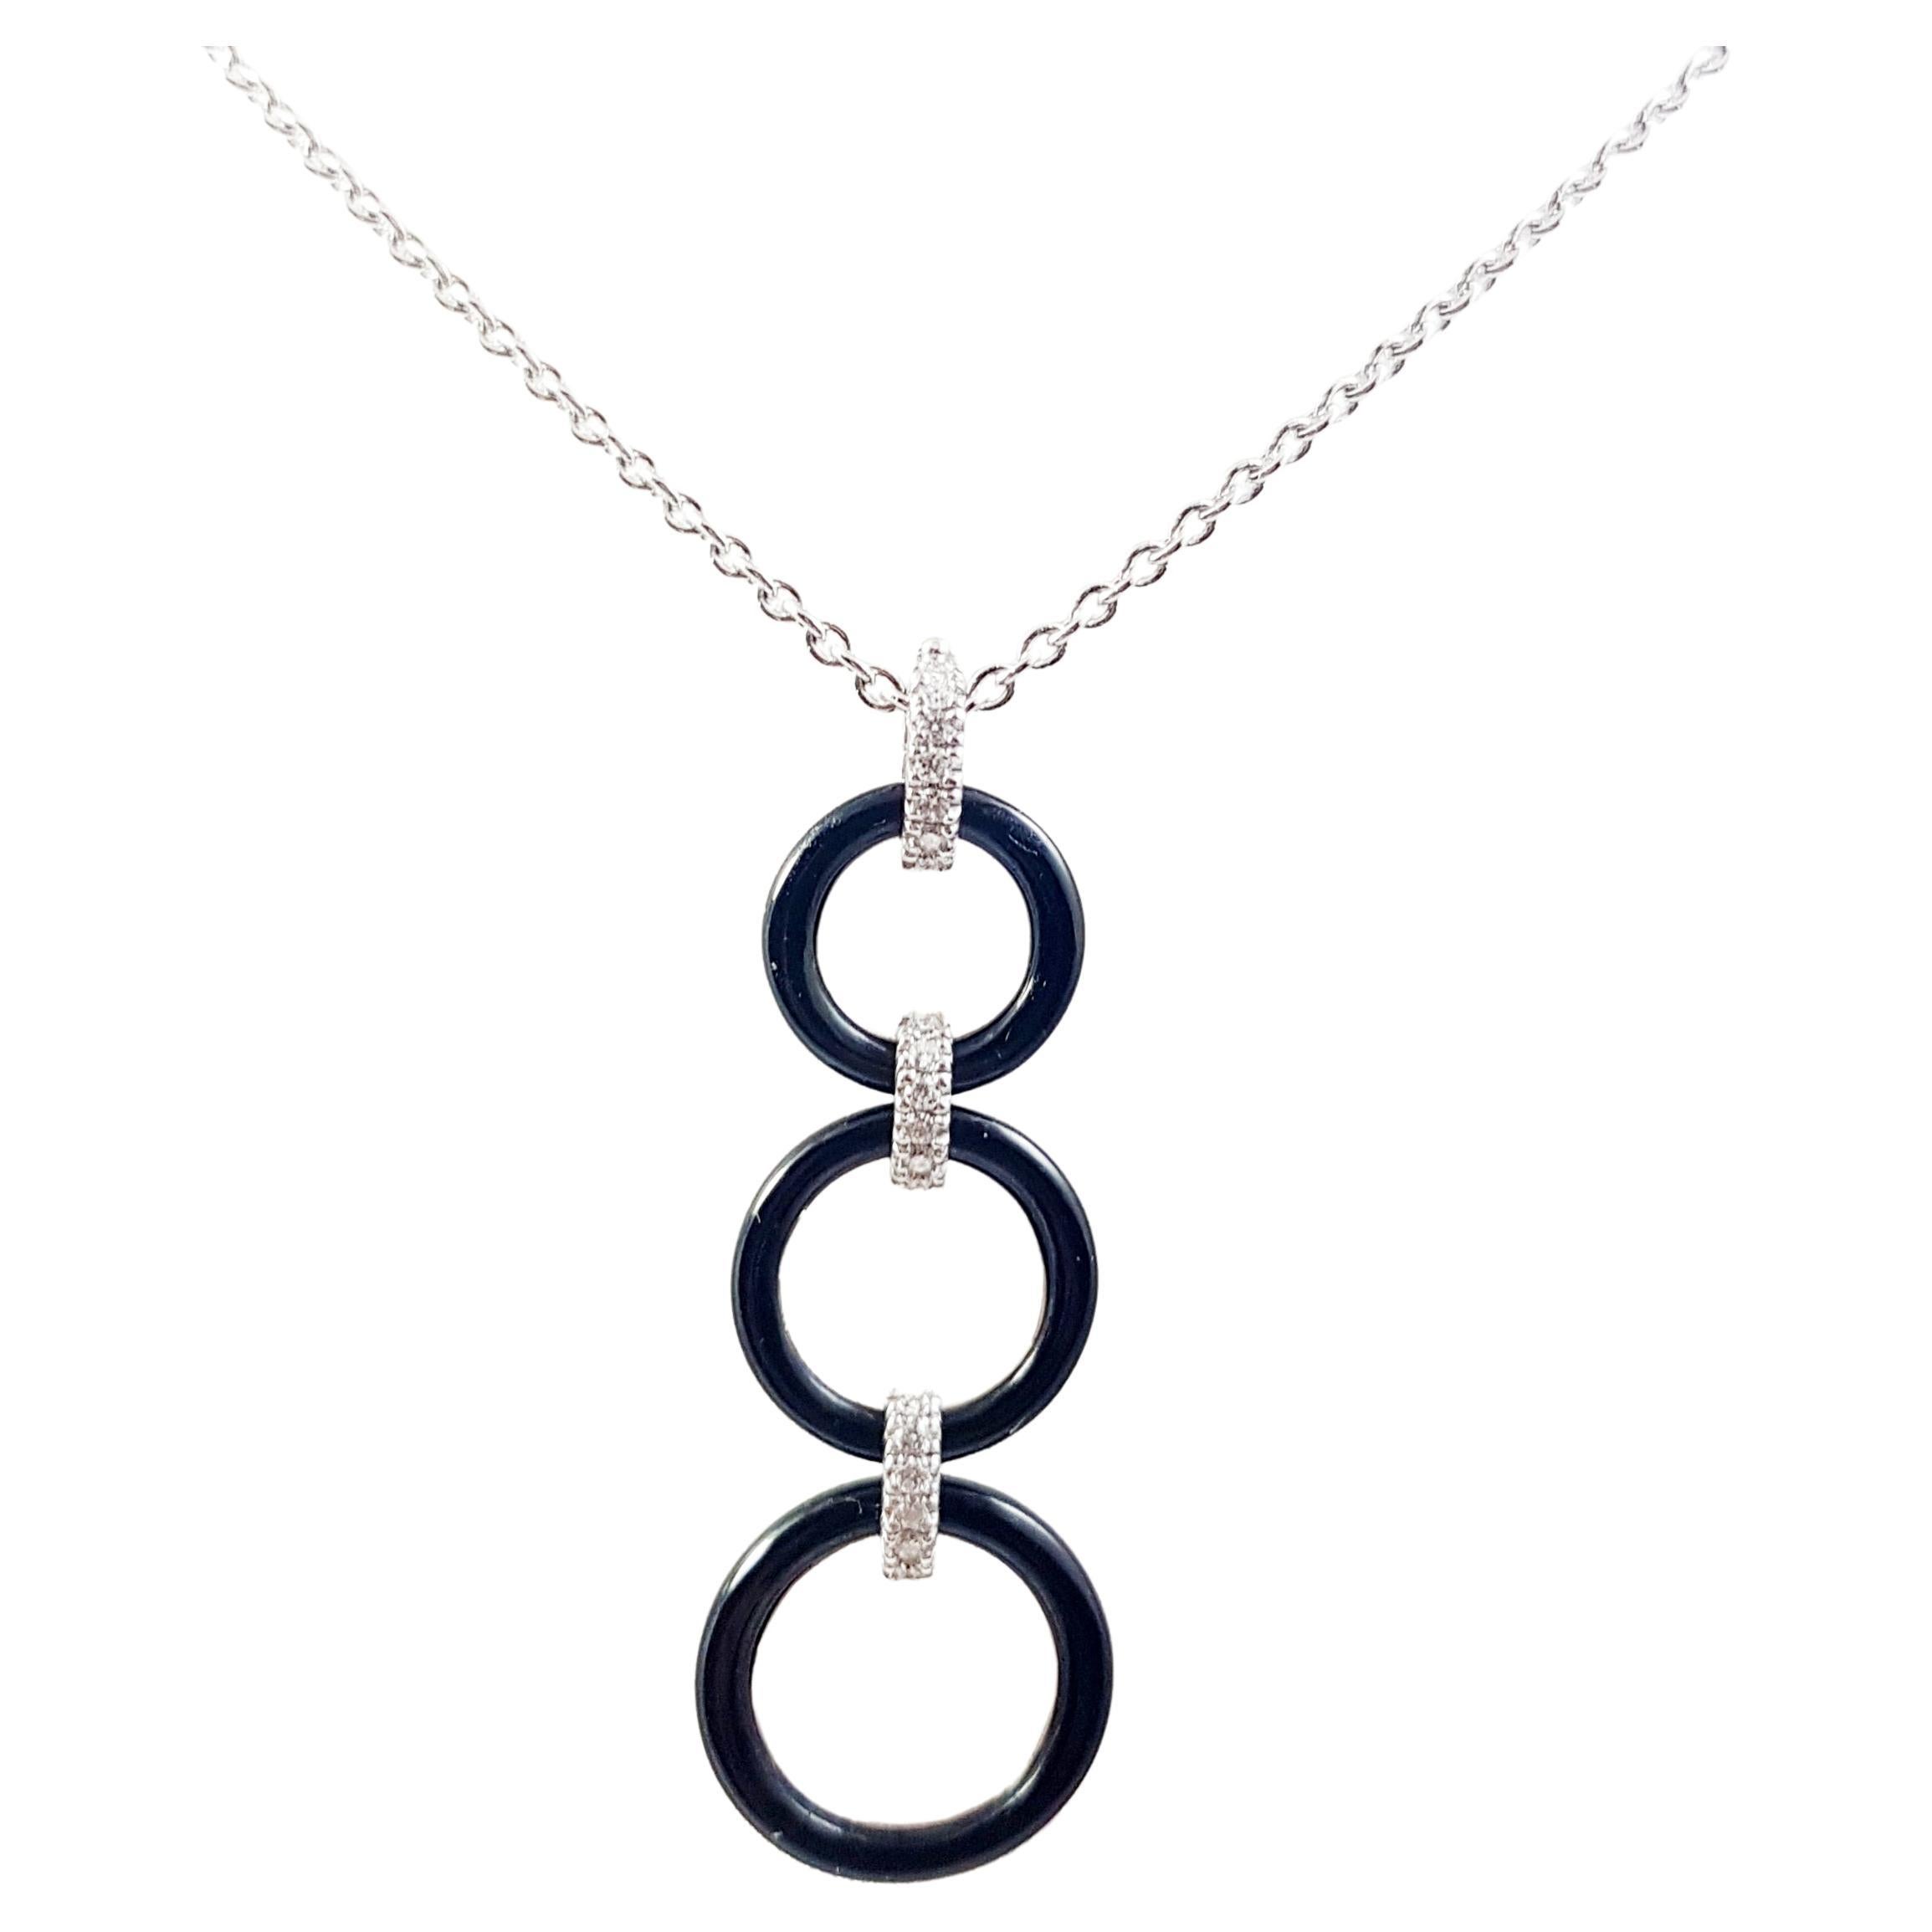 Onyx with Diamond Necklace Set in 18 Karat White Gold Settings